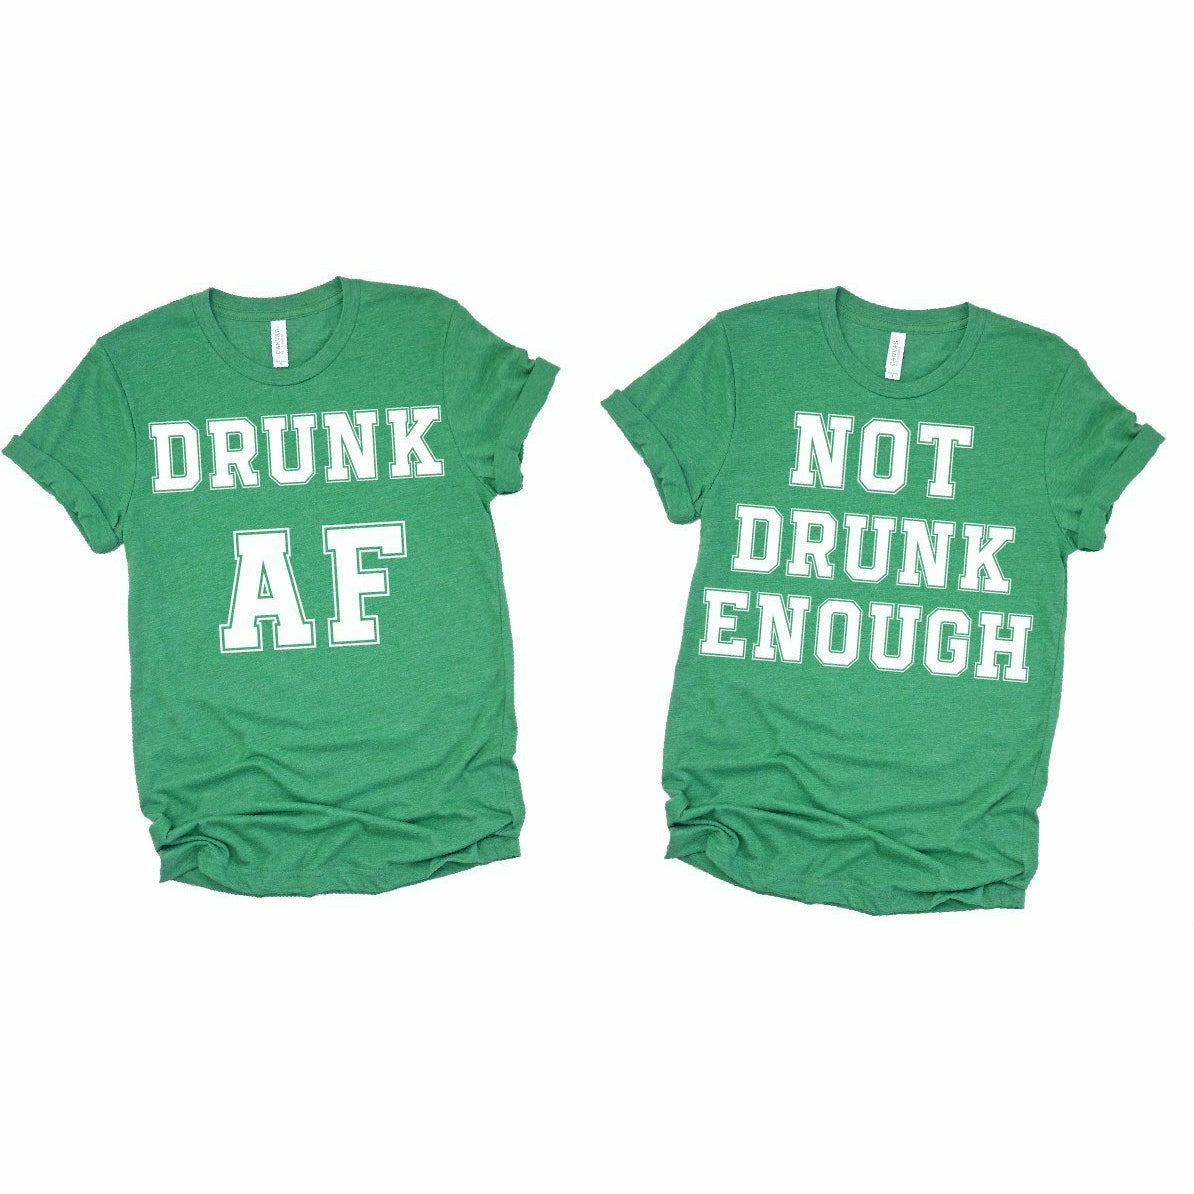 Drunk St. Patty Shirts (sold separately ) - Gabriel Clothing Company